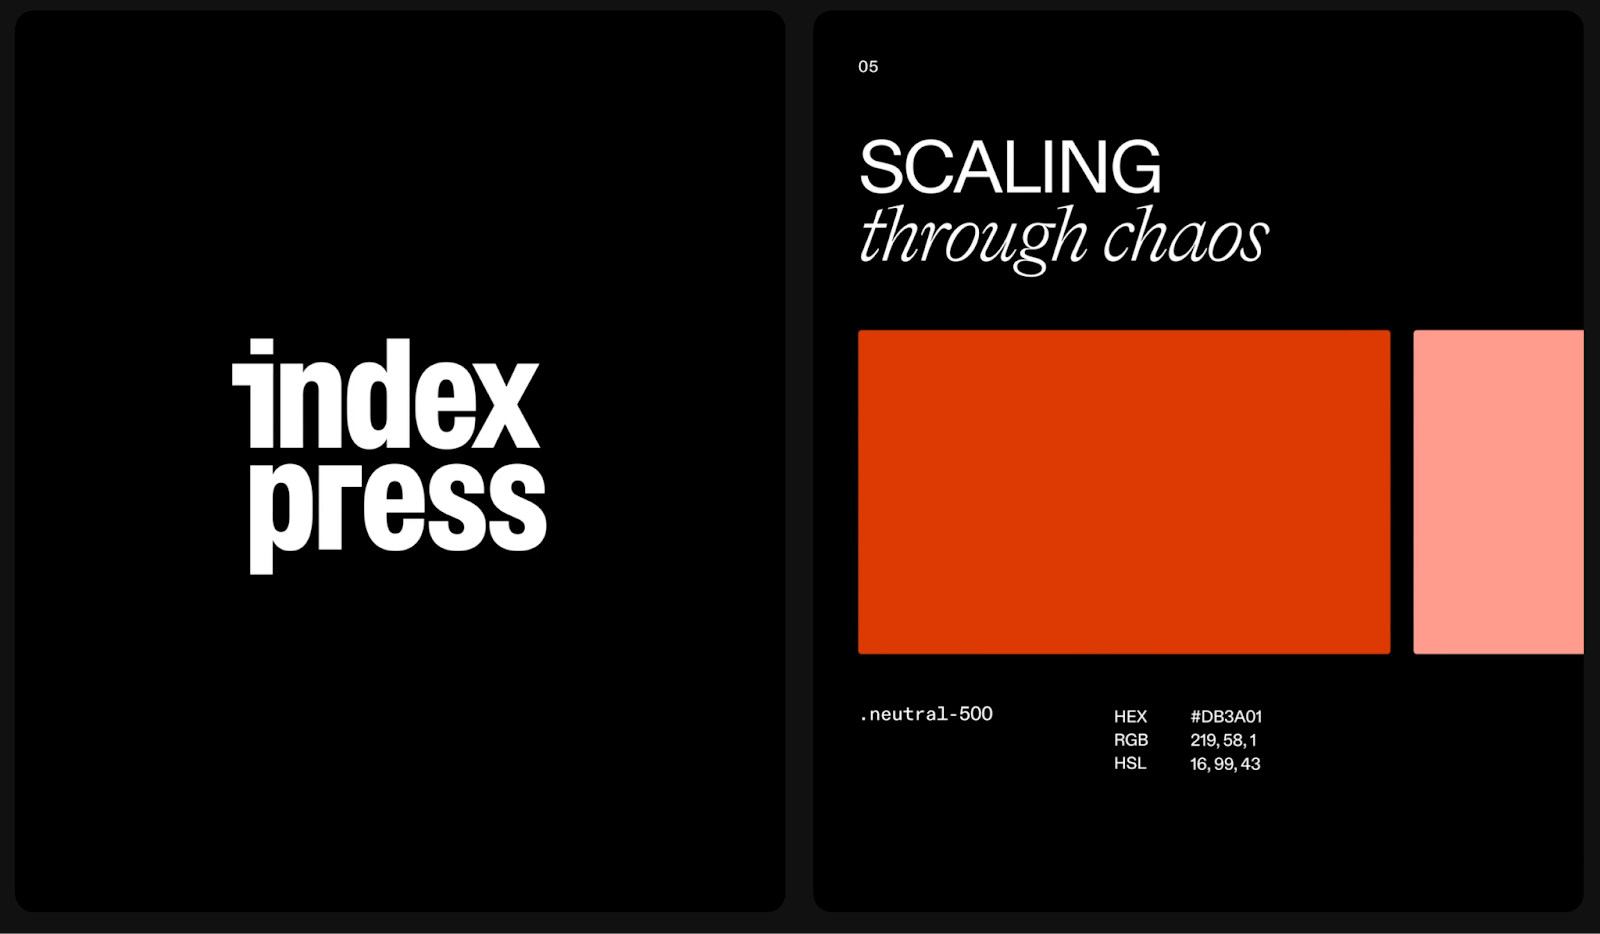 Artifact for the Elevating Business Insights: Index Press Branding by Koto article on Abduzeedo